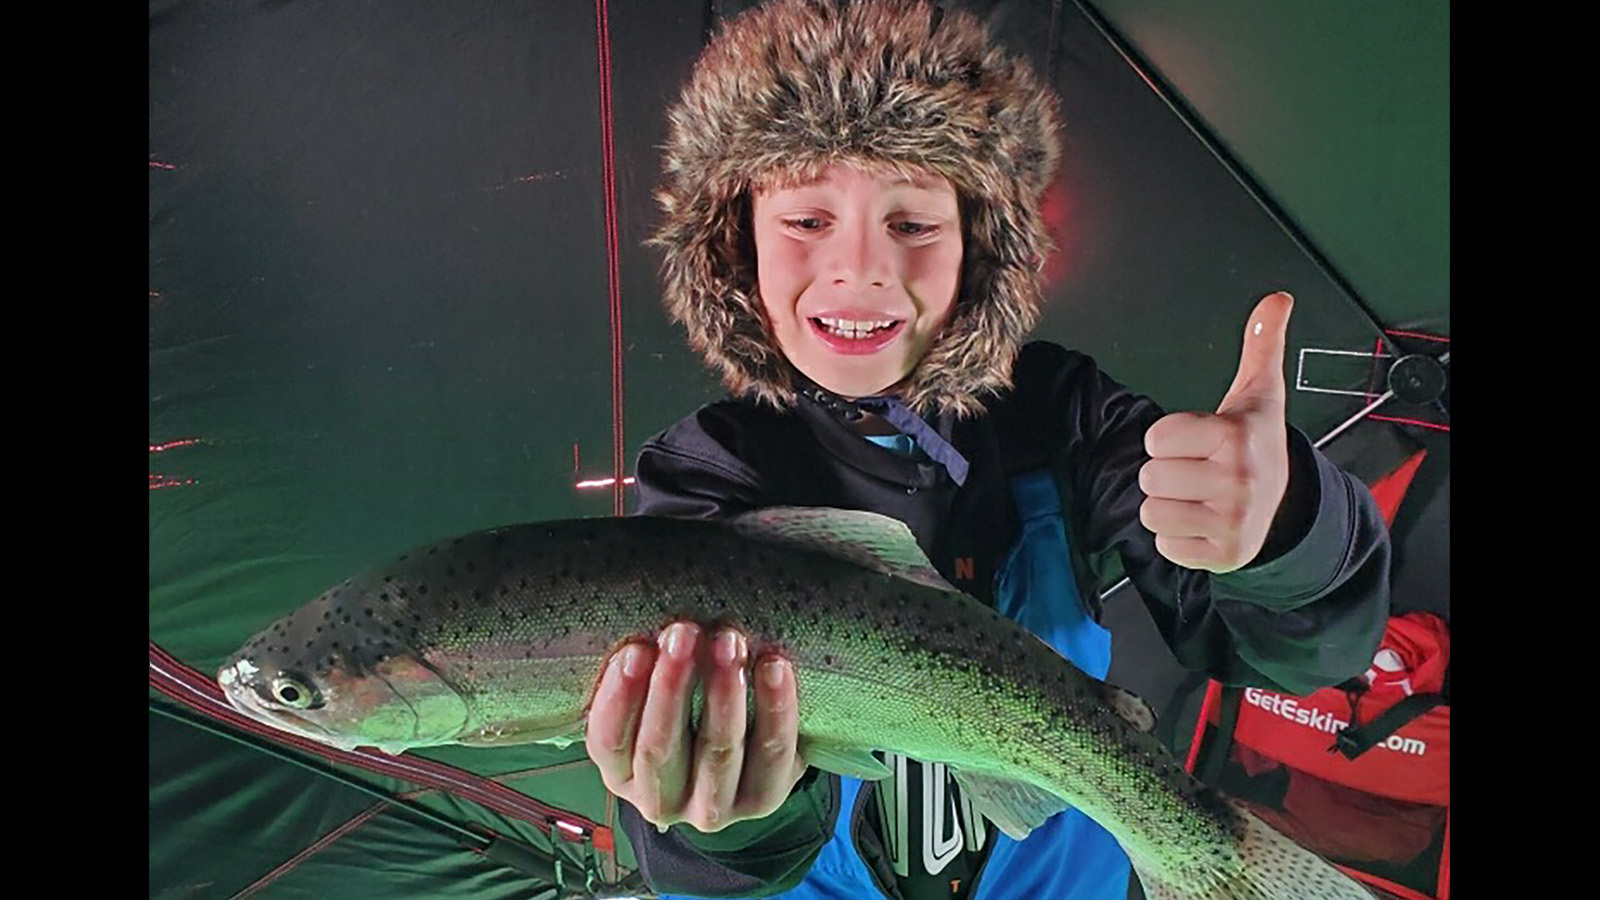 This season try ice fishing on some of Wyoming's lesser-known